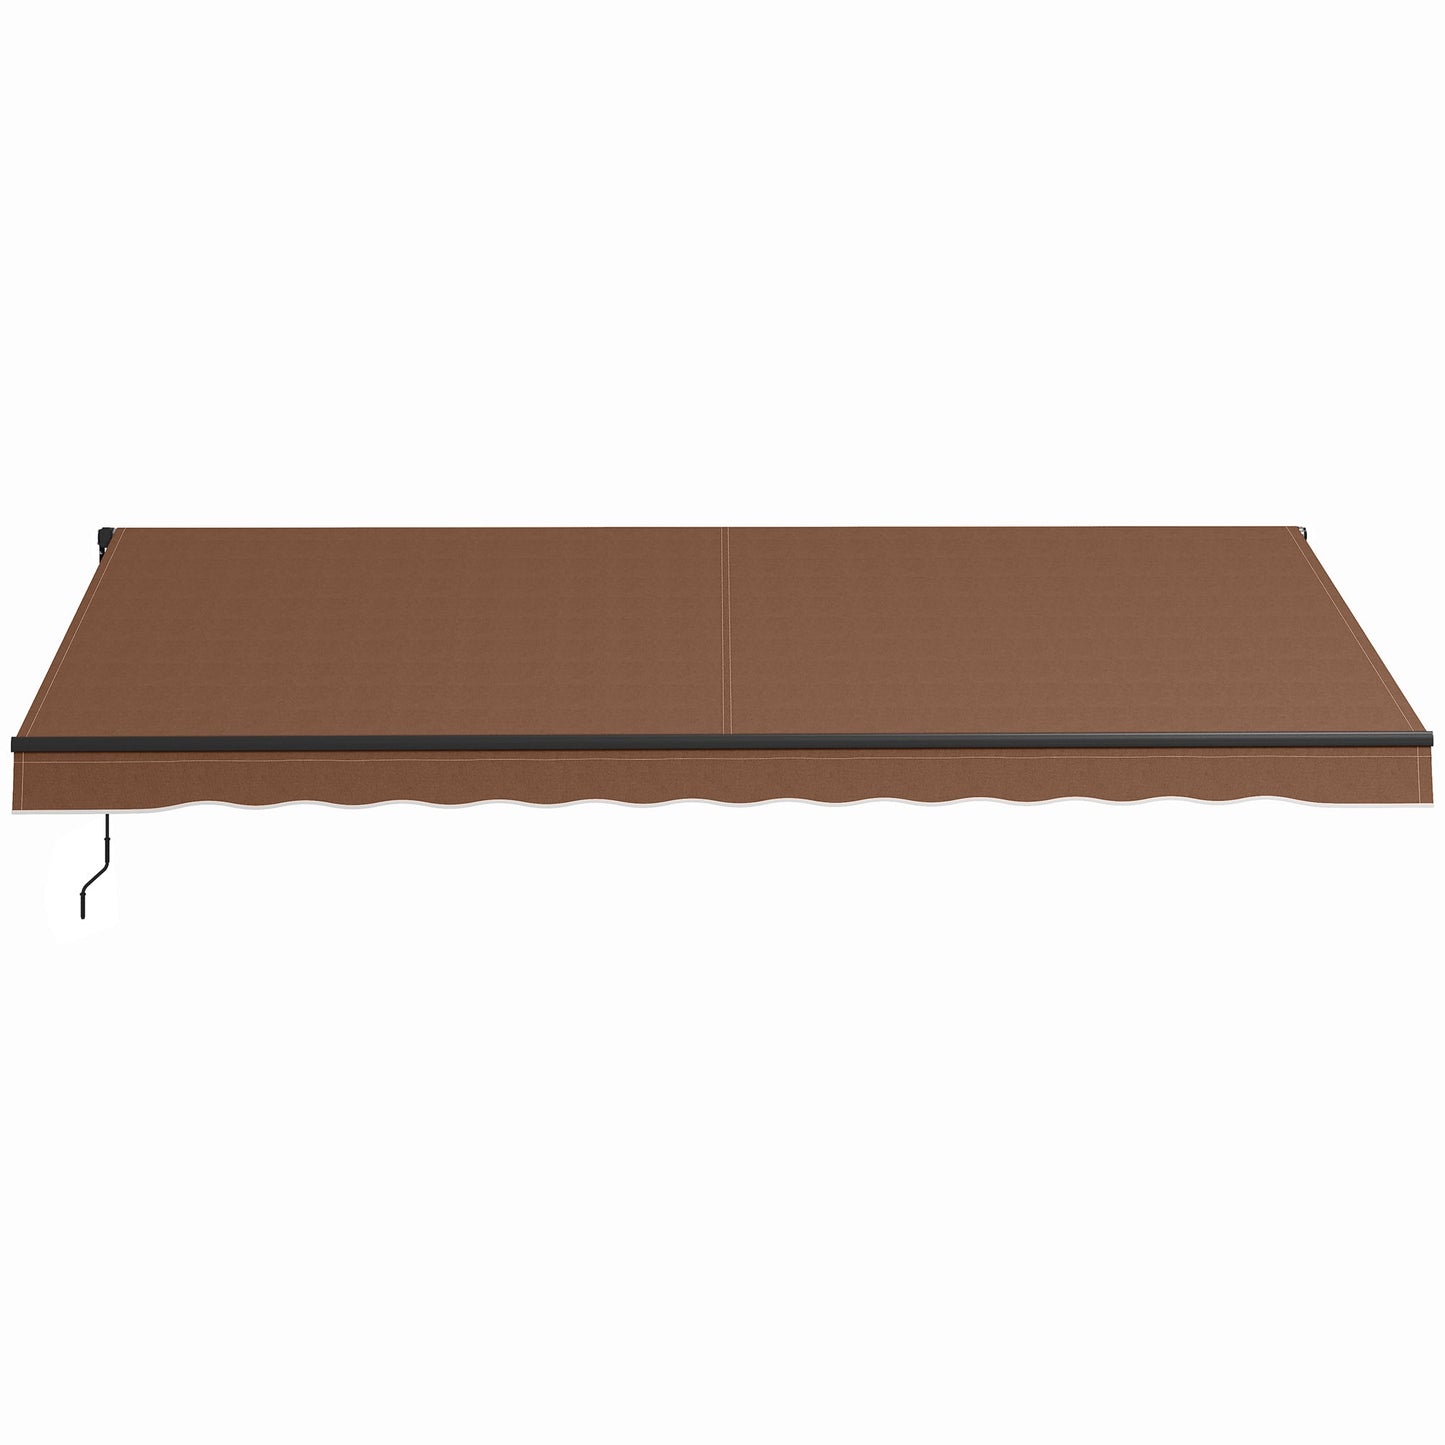 -Outsunny 16' x 10' Retractable Awning, 280gsm UV Resistant Sunshade Shelter for Deck, Balcony, Yard, Brown - Outdoor Style Company